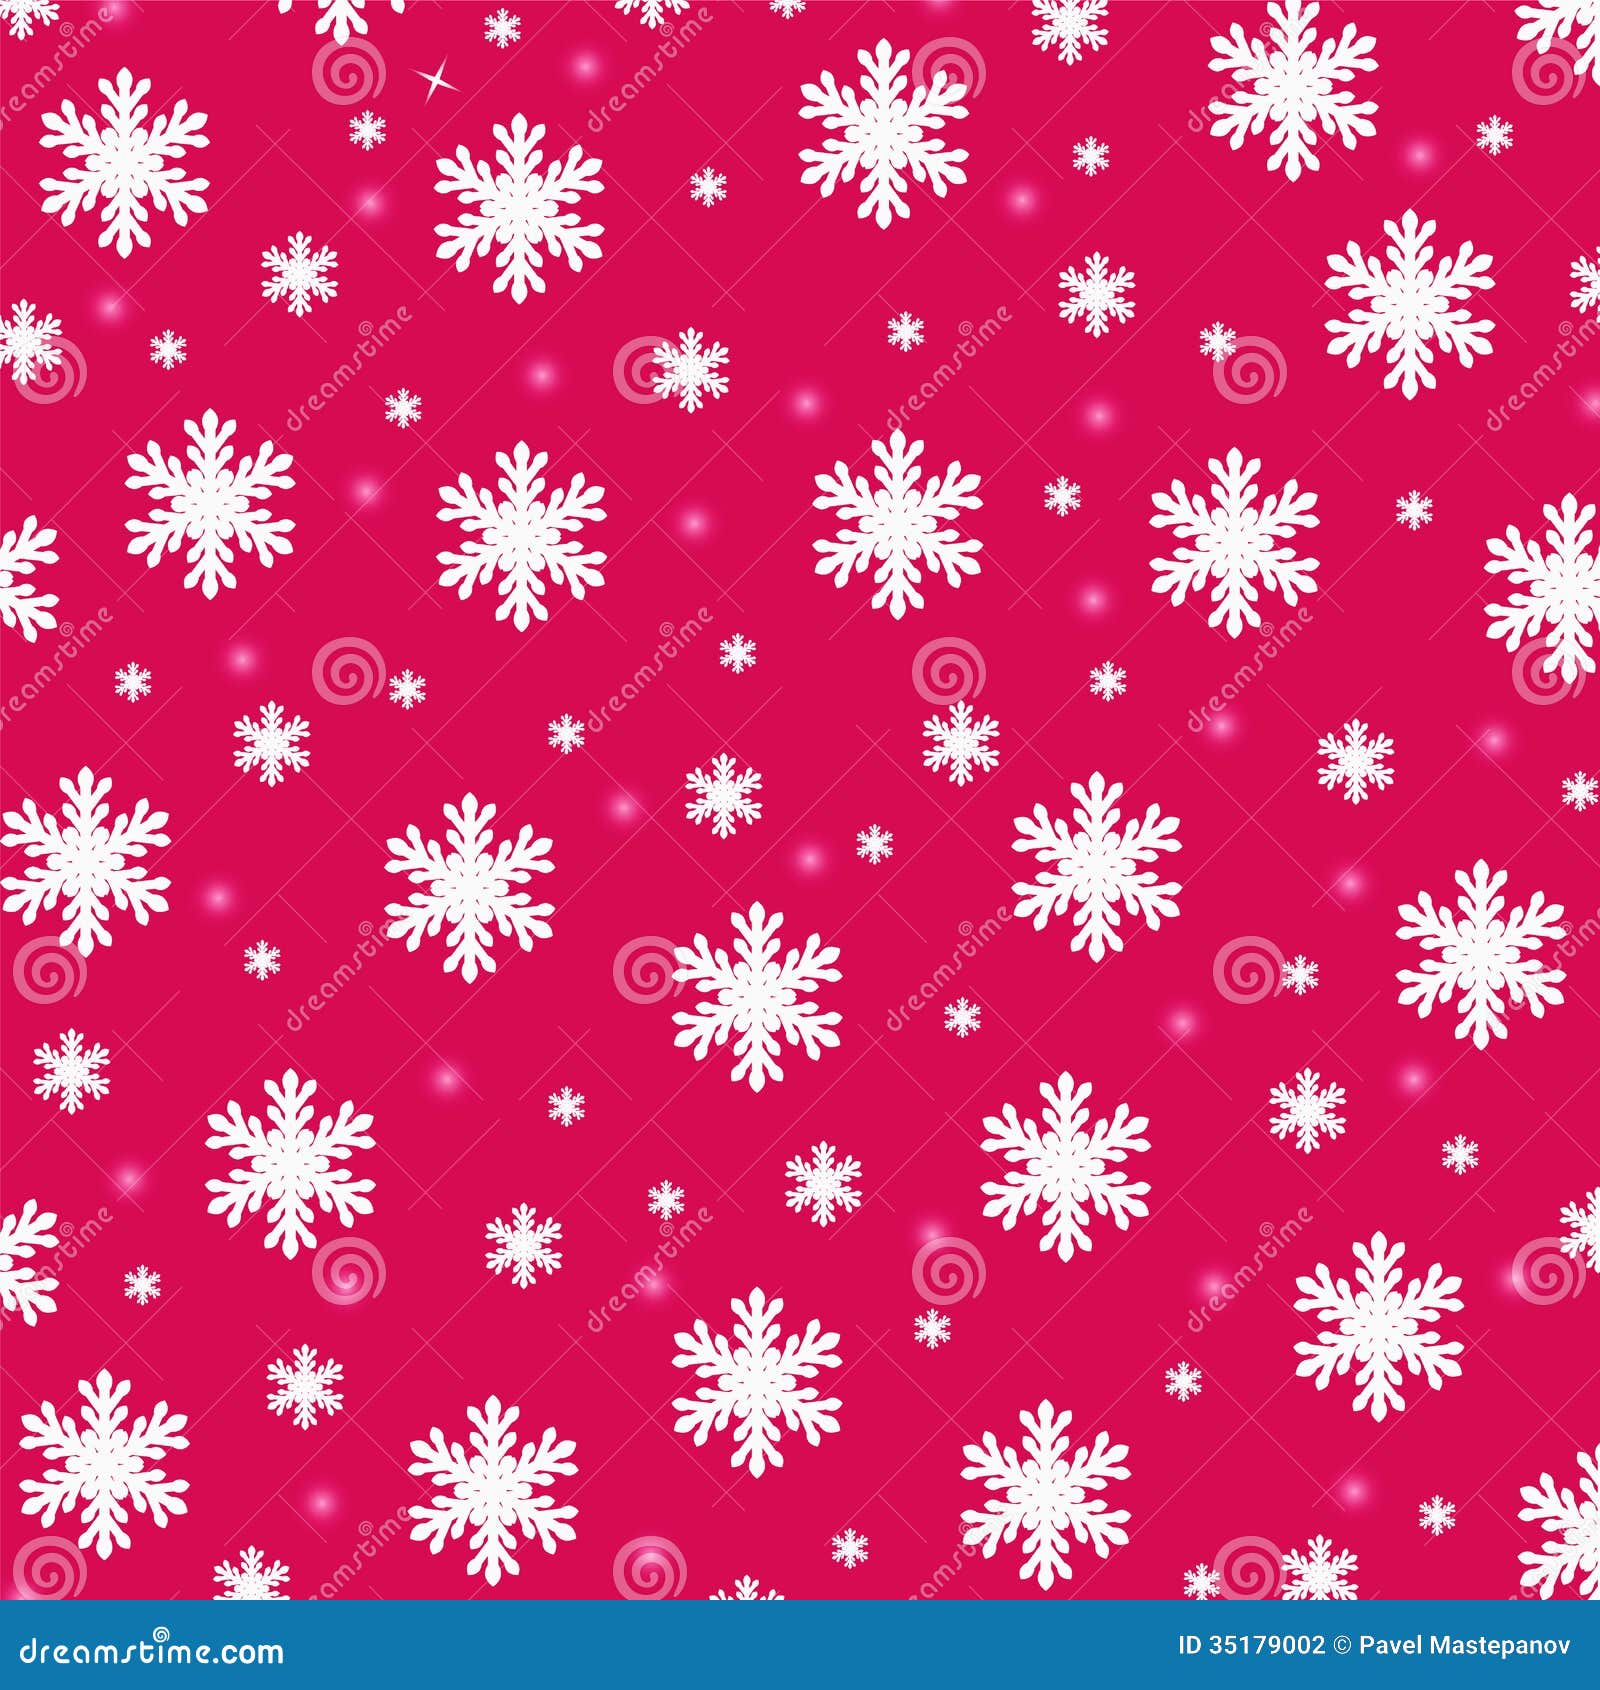 Christmas Background With Snowflakes Stock Photography 